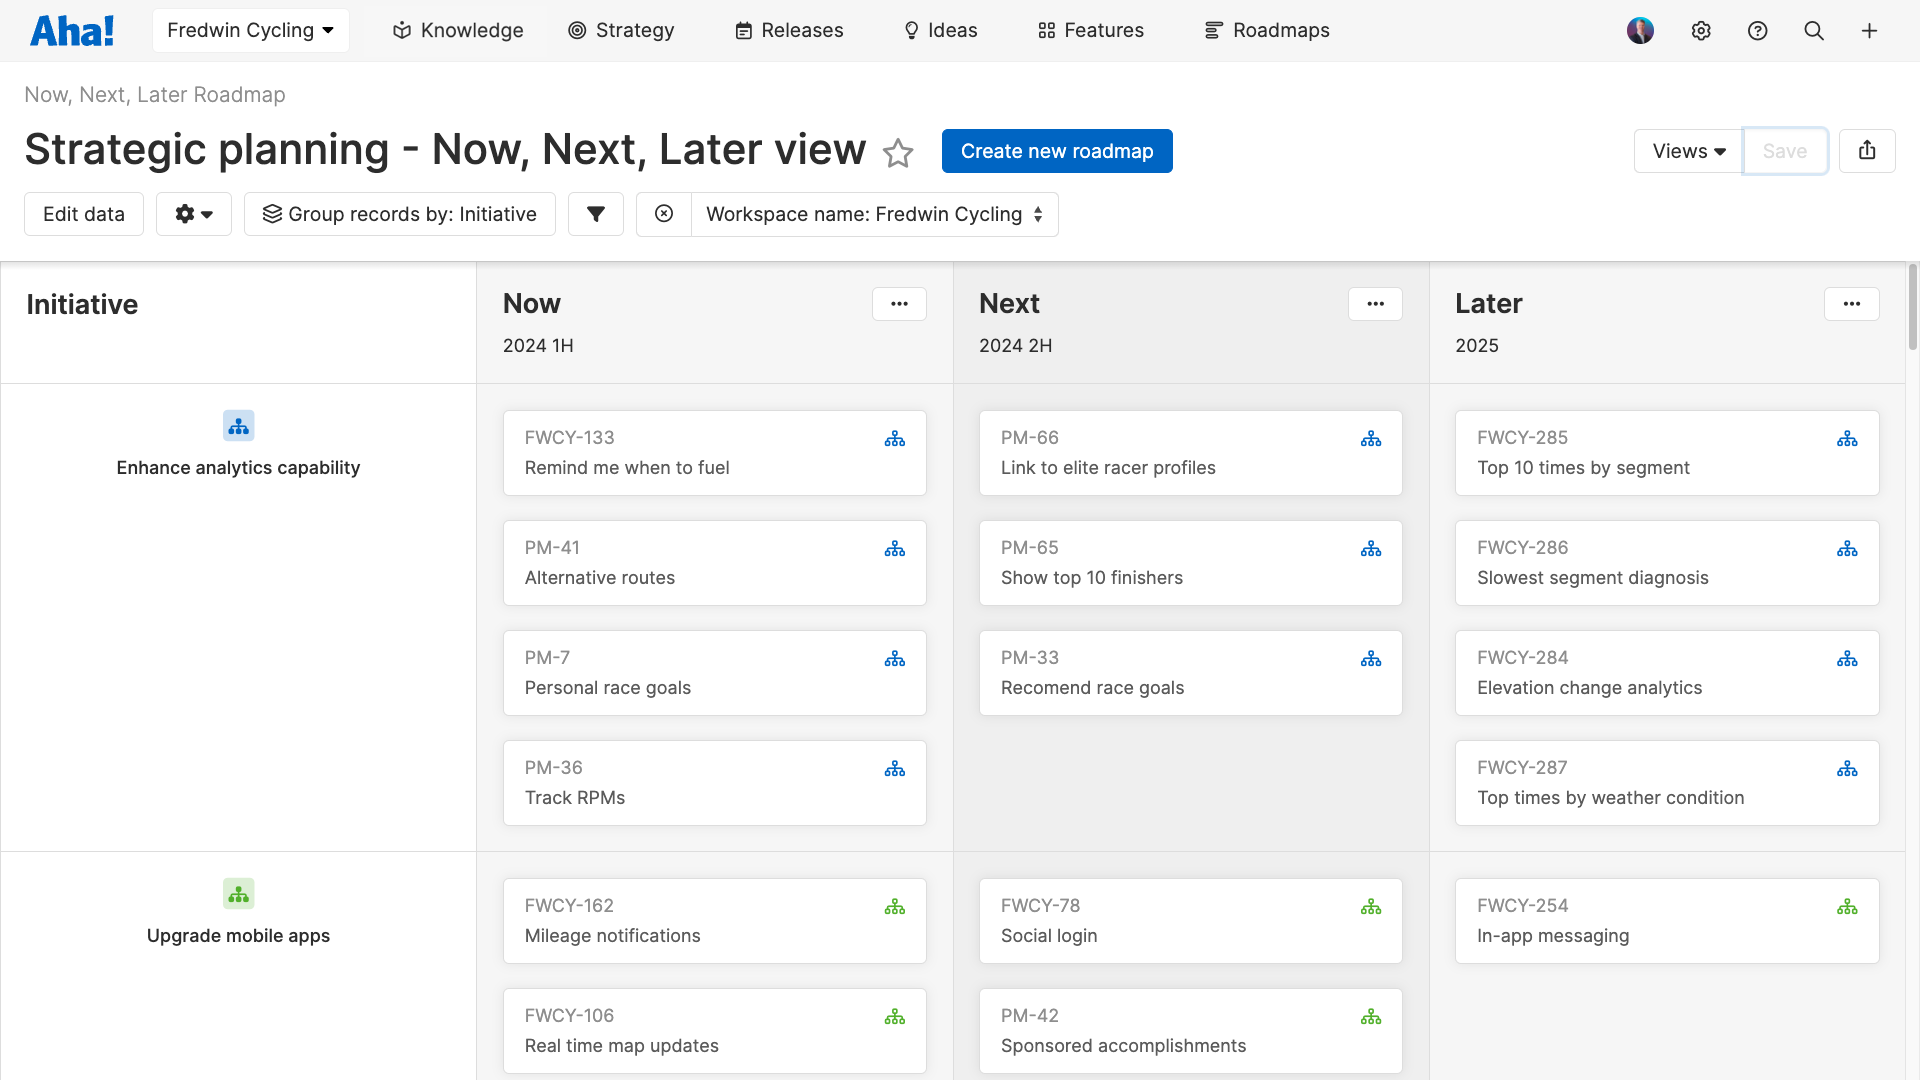 Roadmaps feature page - Now, Next, Later view